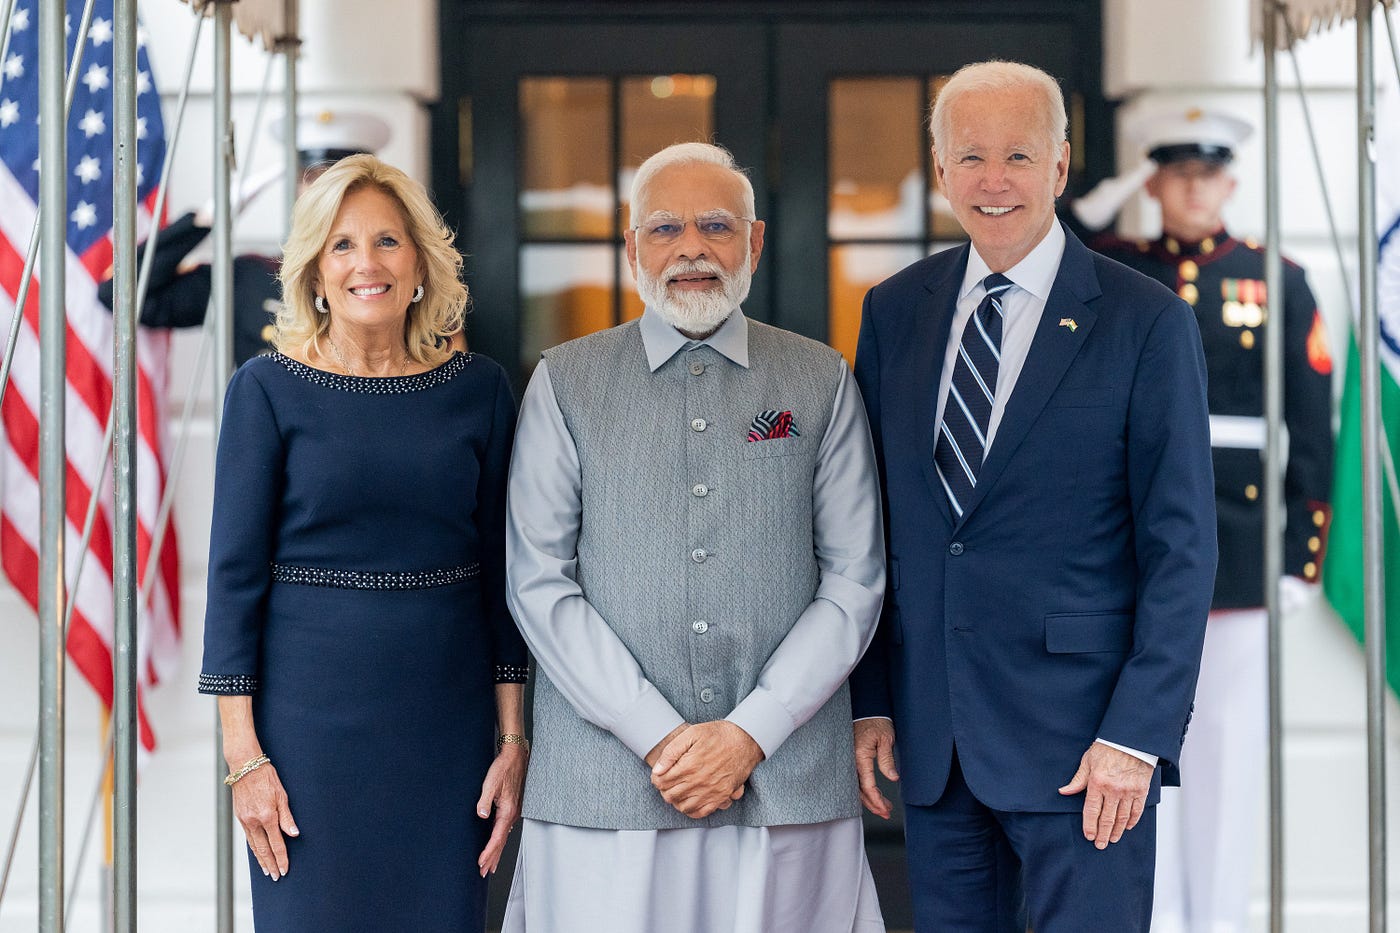 India PM Modi is on a landmark visit to the U.S. Here's what to expect